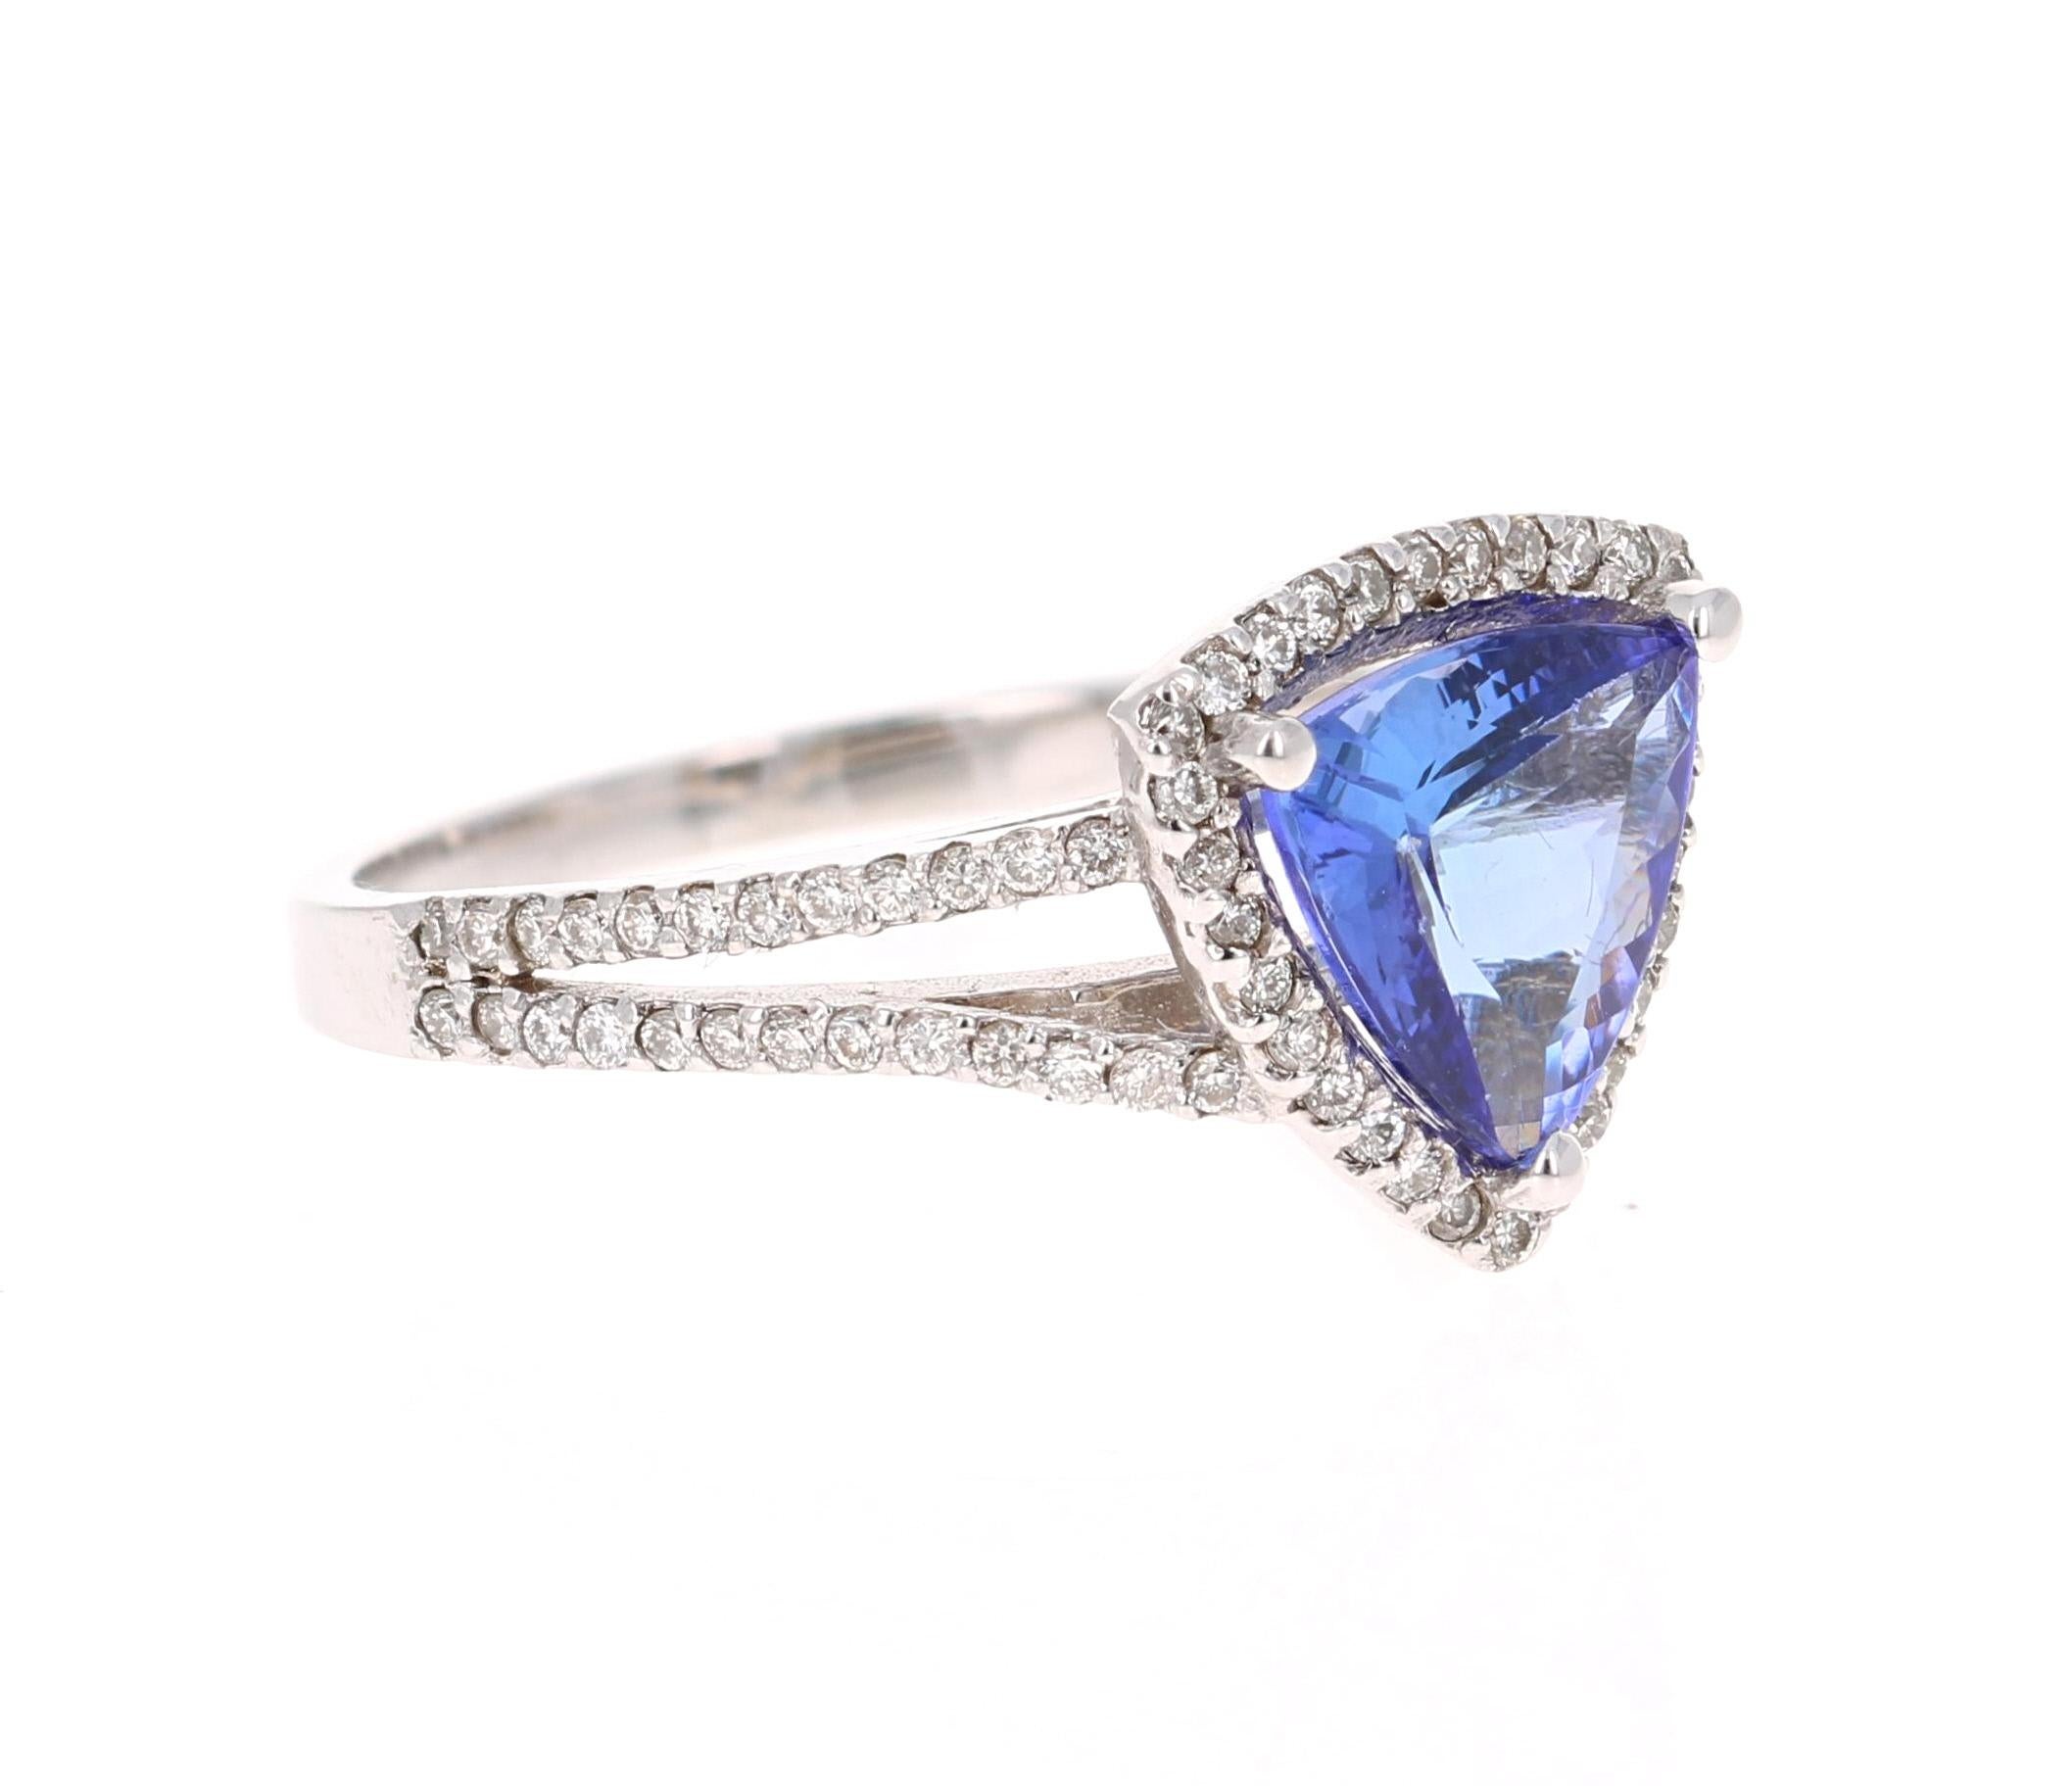 This ring has a gorgeous Trillion Cut Tanzanite that weighs 1.77 Carats. It is surrounded by 78 Round Cut Diamonds that weigh 0.37 Carats. 

Elegantly set in 14 Karat White Gold and weighs approximately 3.4 grams 

The ring is a size 7 and can be